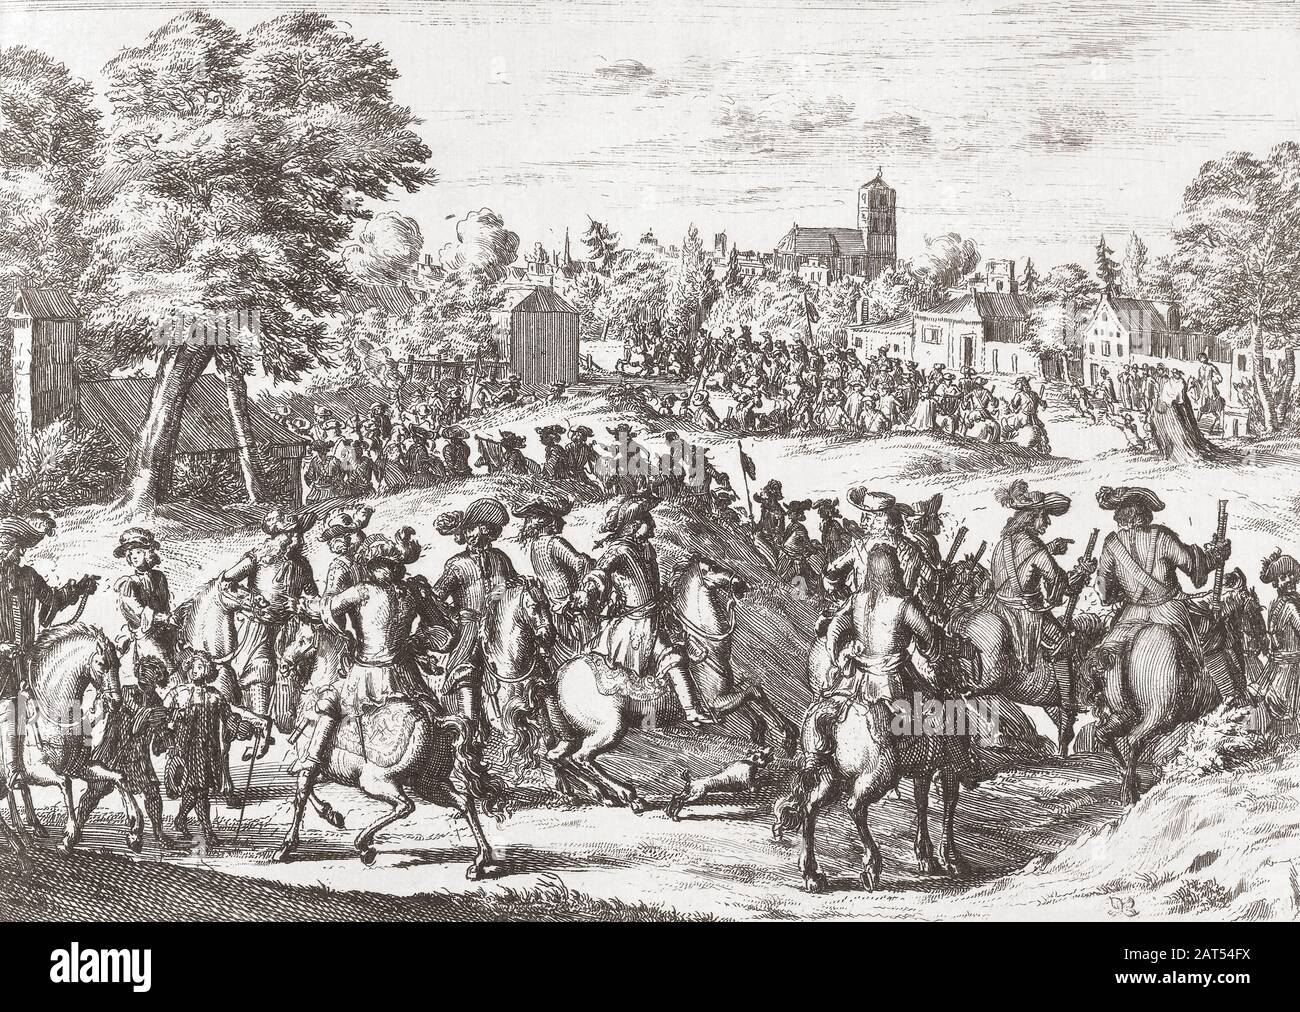 King William III of England entering Dublin with his forces in July 1690 after his triumph over the Jacobites at the Battle of the Boyne. Stock Photo